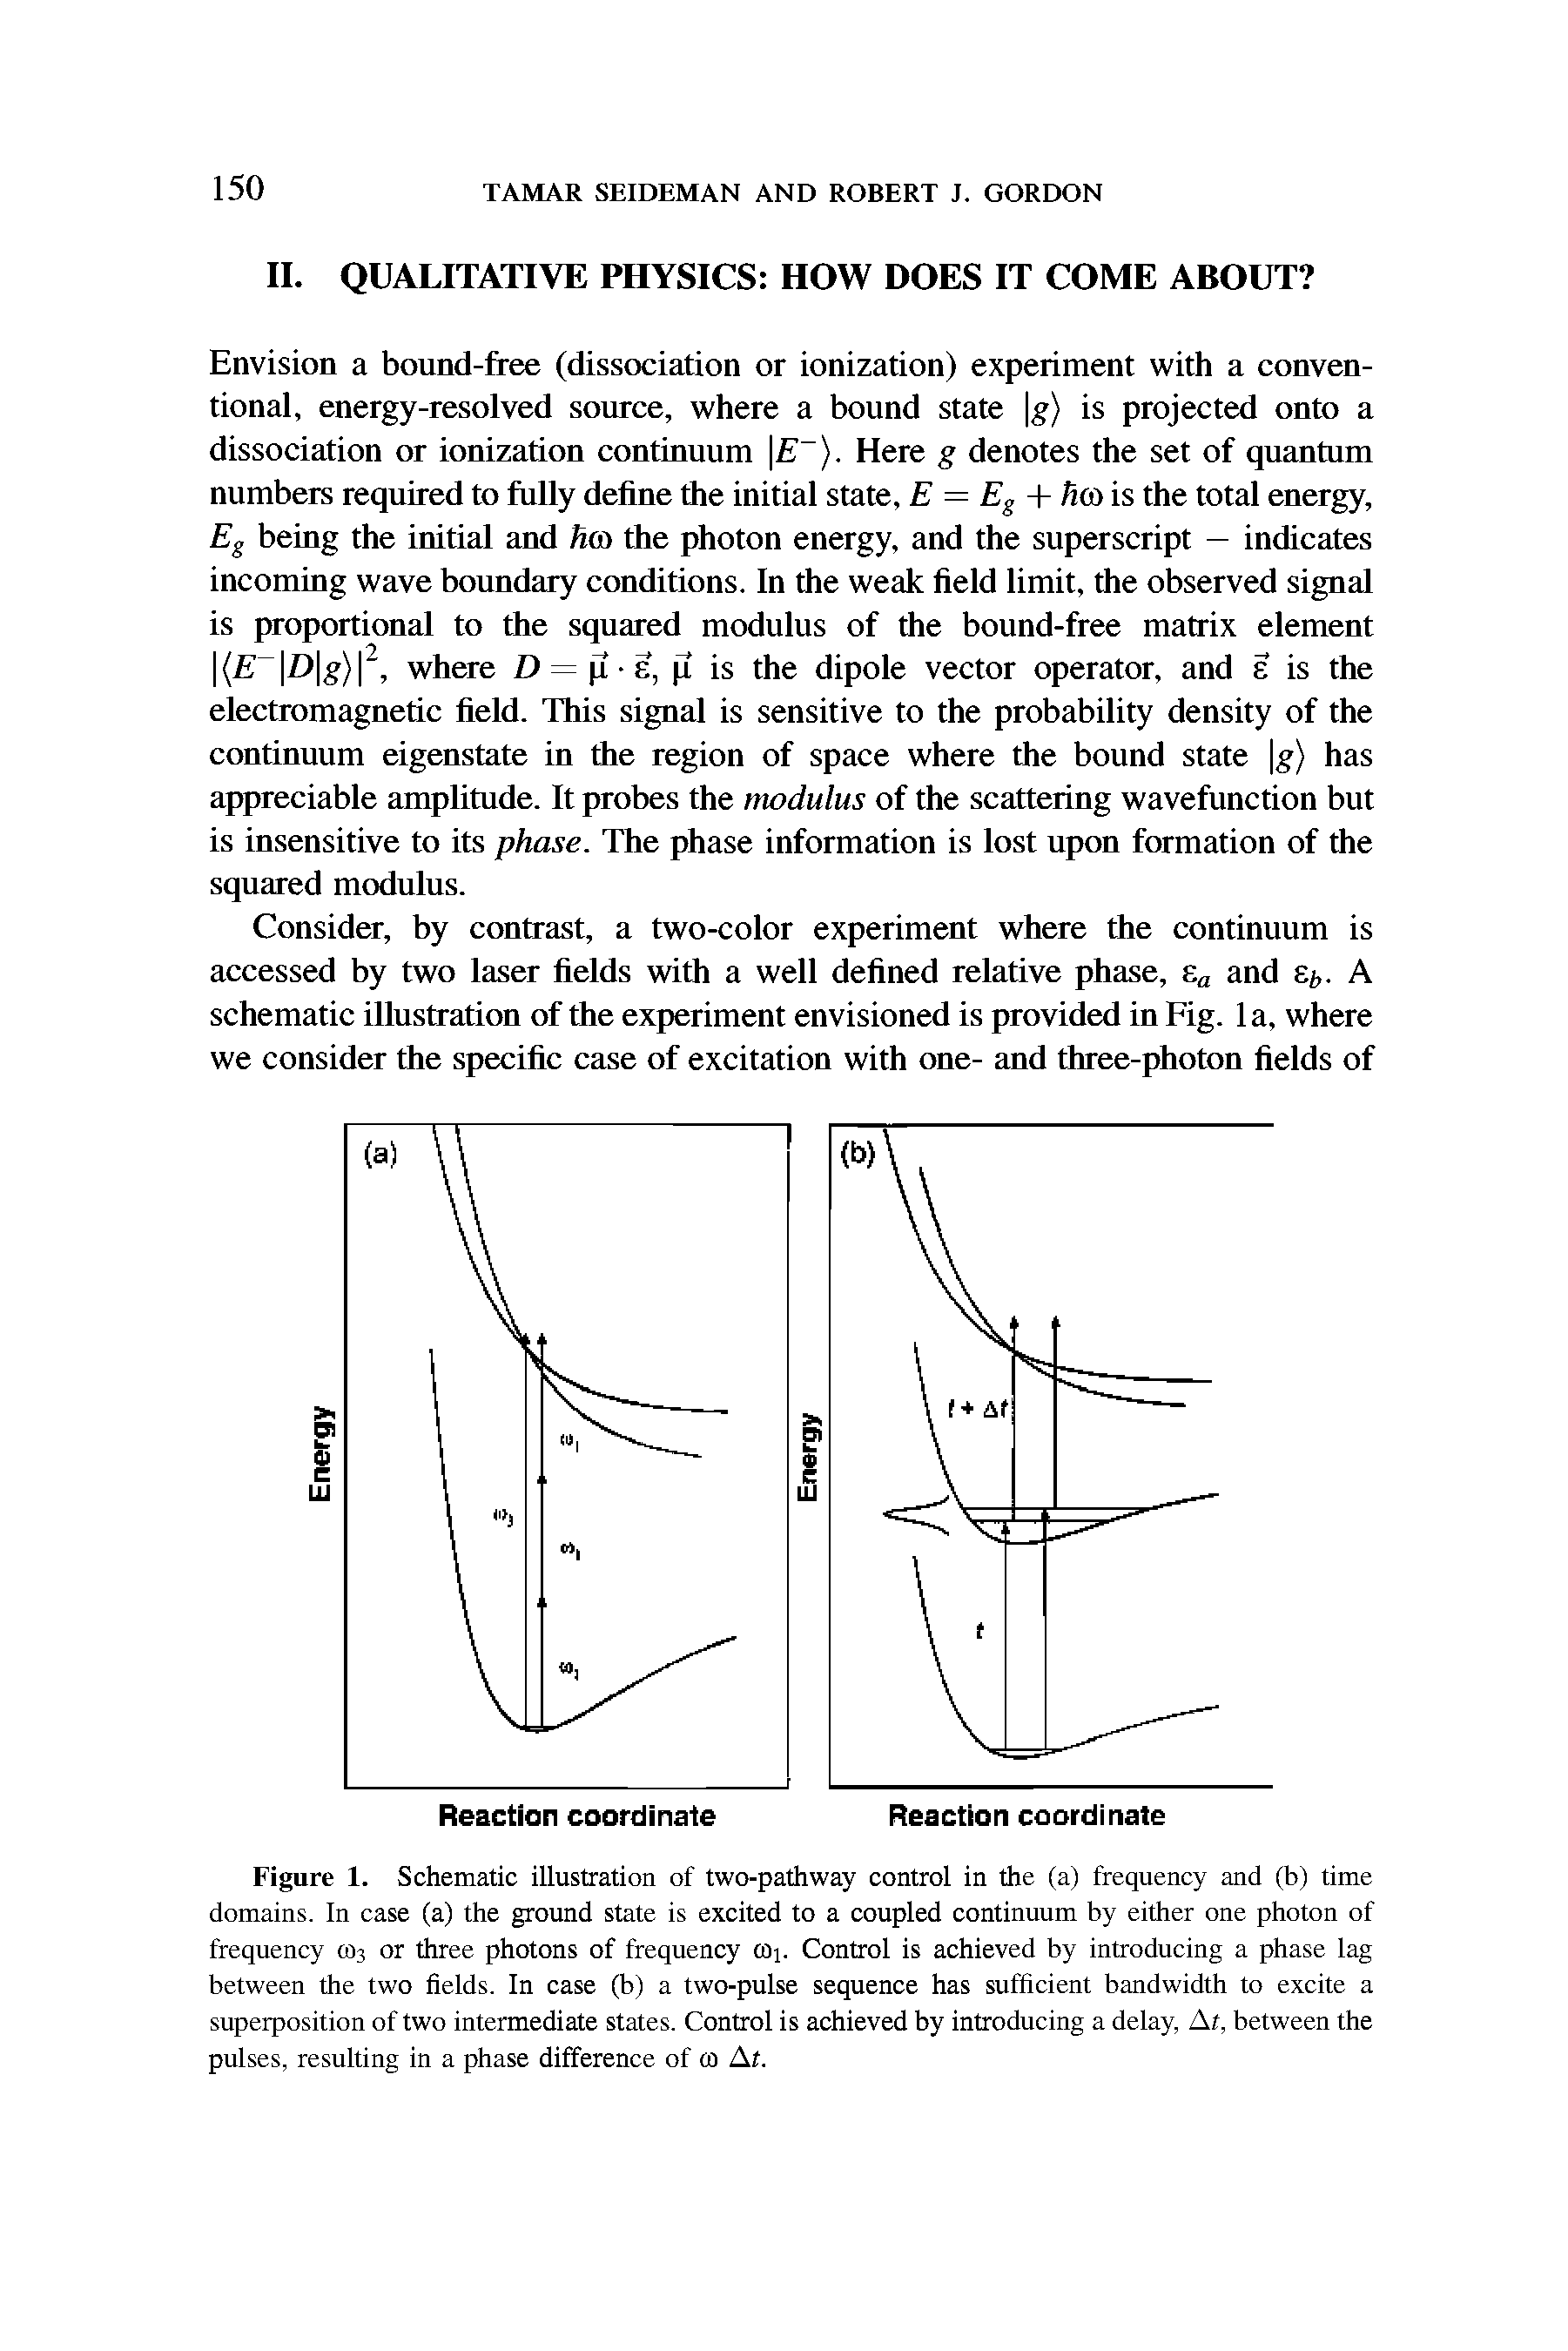 Figure 1. Schematic illustration of two-pathway control in the (a) frequency and (b) time domains. In case (a) the ground state is excited to a coupled continuum by either one photon of frequency CO3 or three photons of frequency C >i. Control is achieved by introducing a phase lag between the two fields. In case (b) a two-pulse sequence has sufficient bandwidth to excite a superposition of two intermediate states. Control is achieved by introducing a delay, At, between the pulses, resulting in a phase difference of to At.